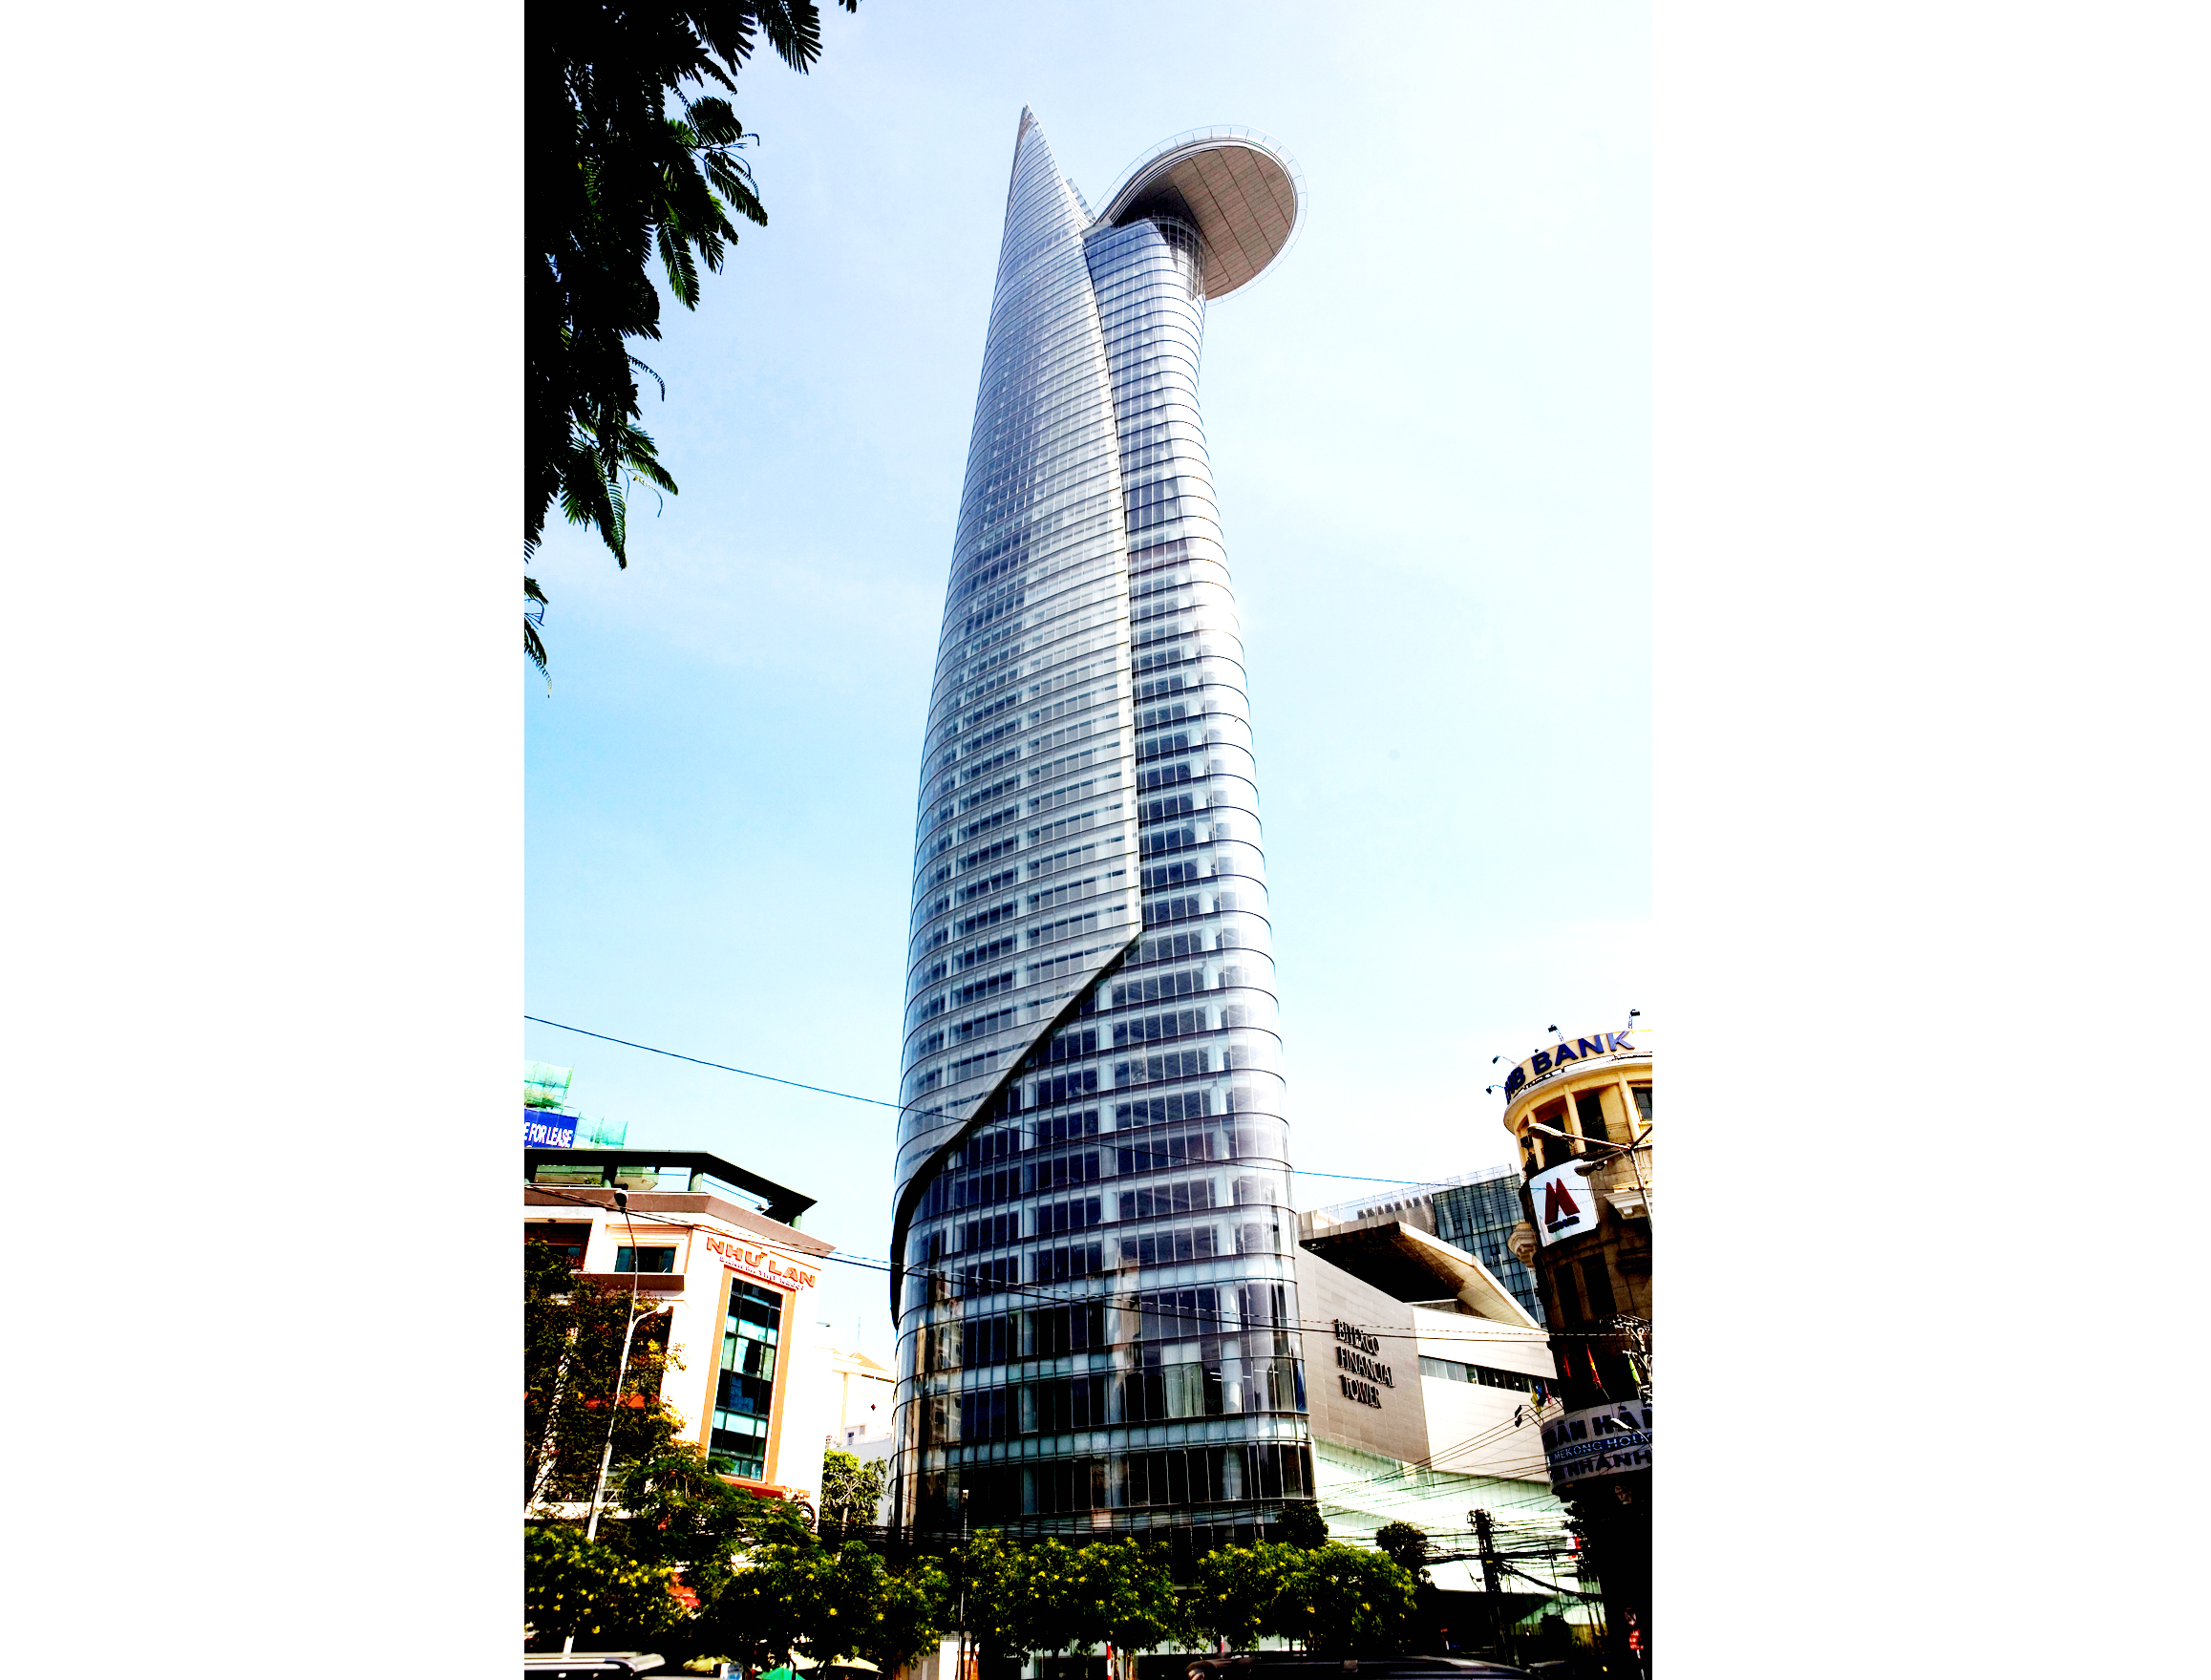 BITEXCO FINANCIAL TOWER